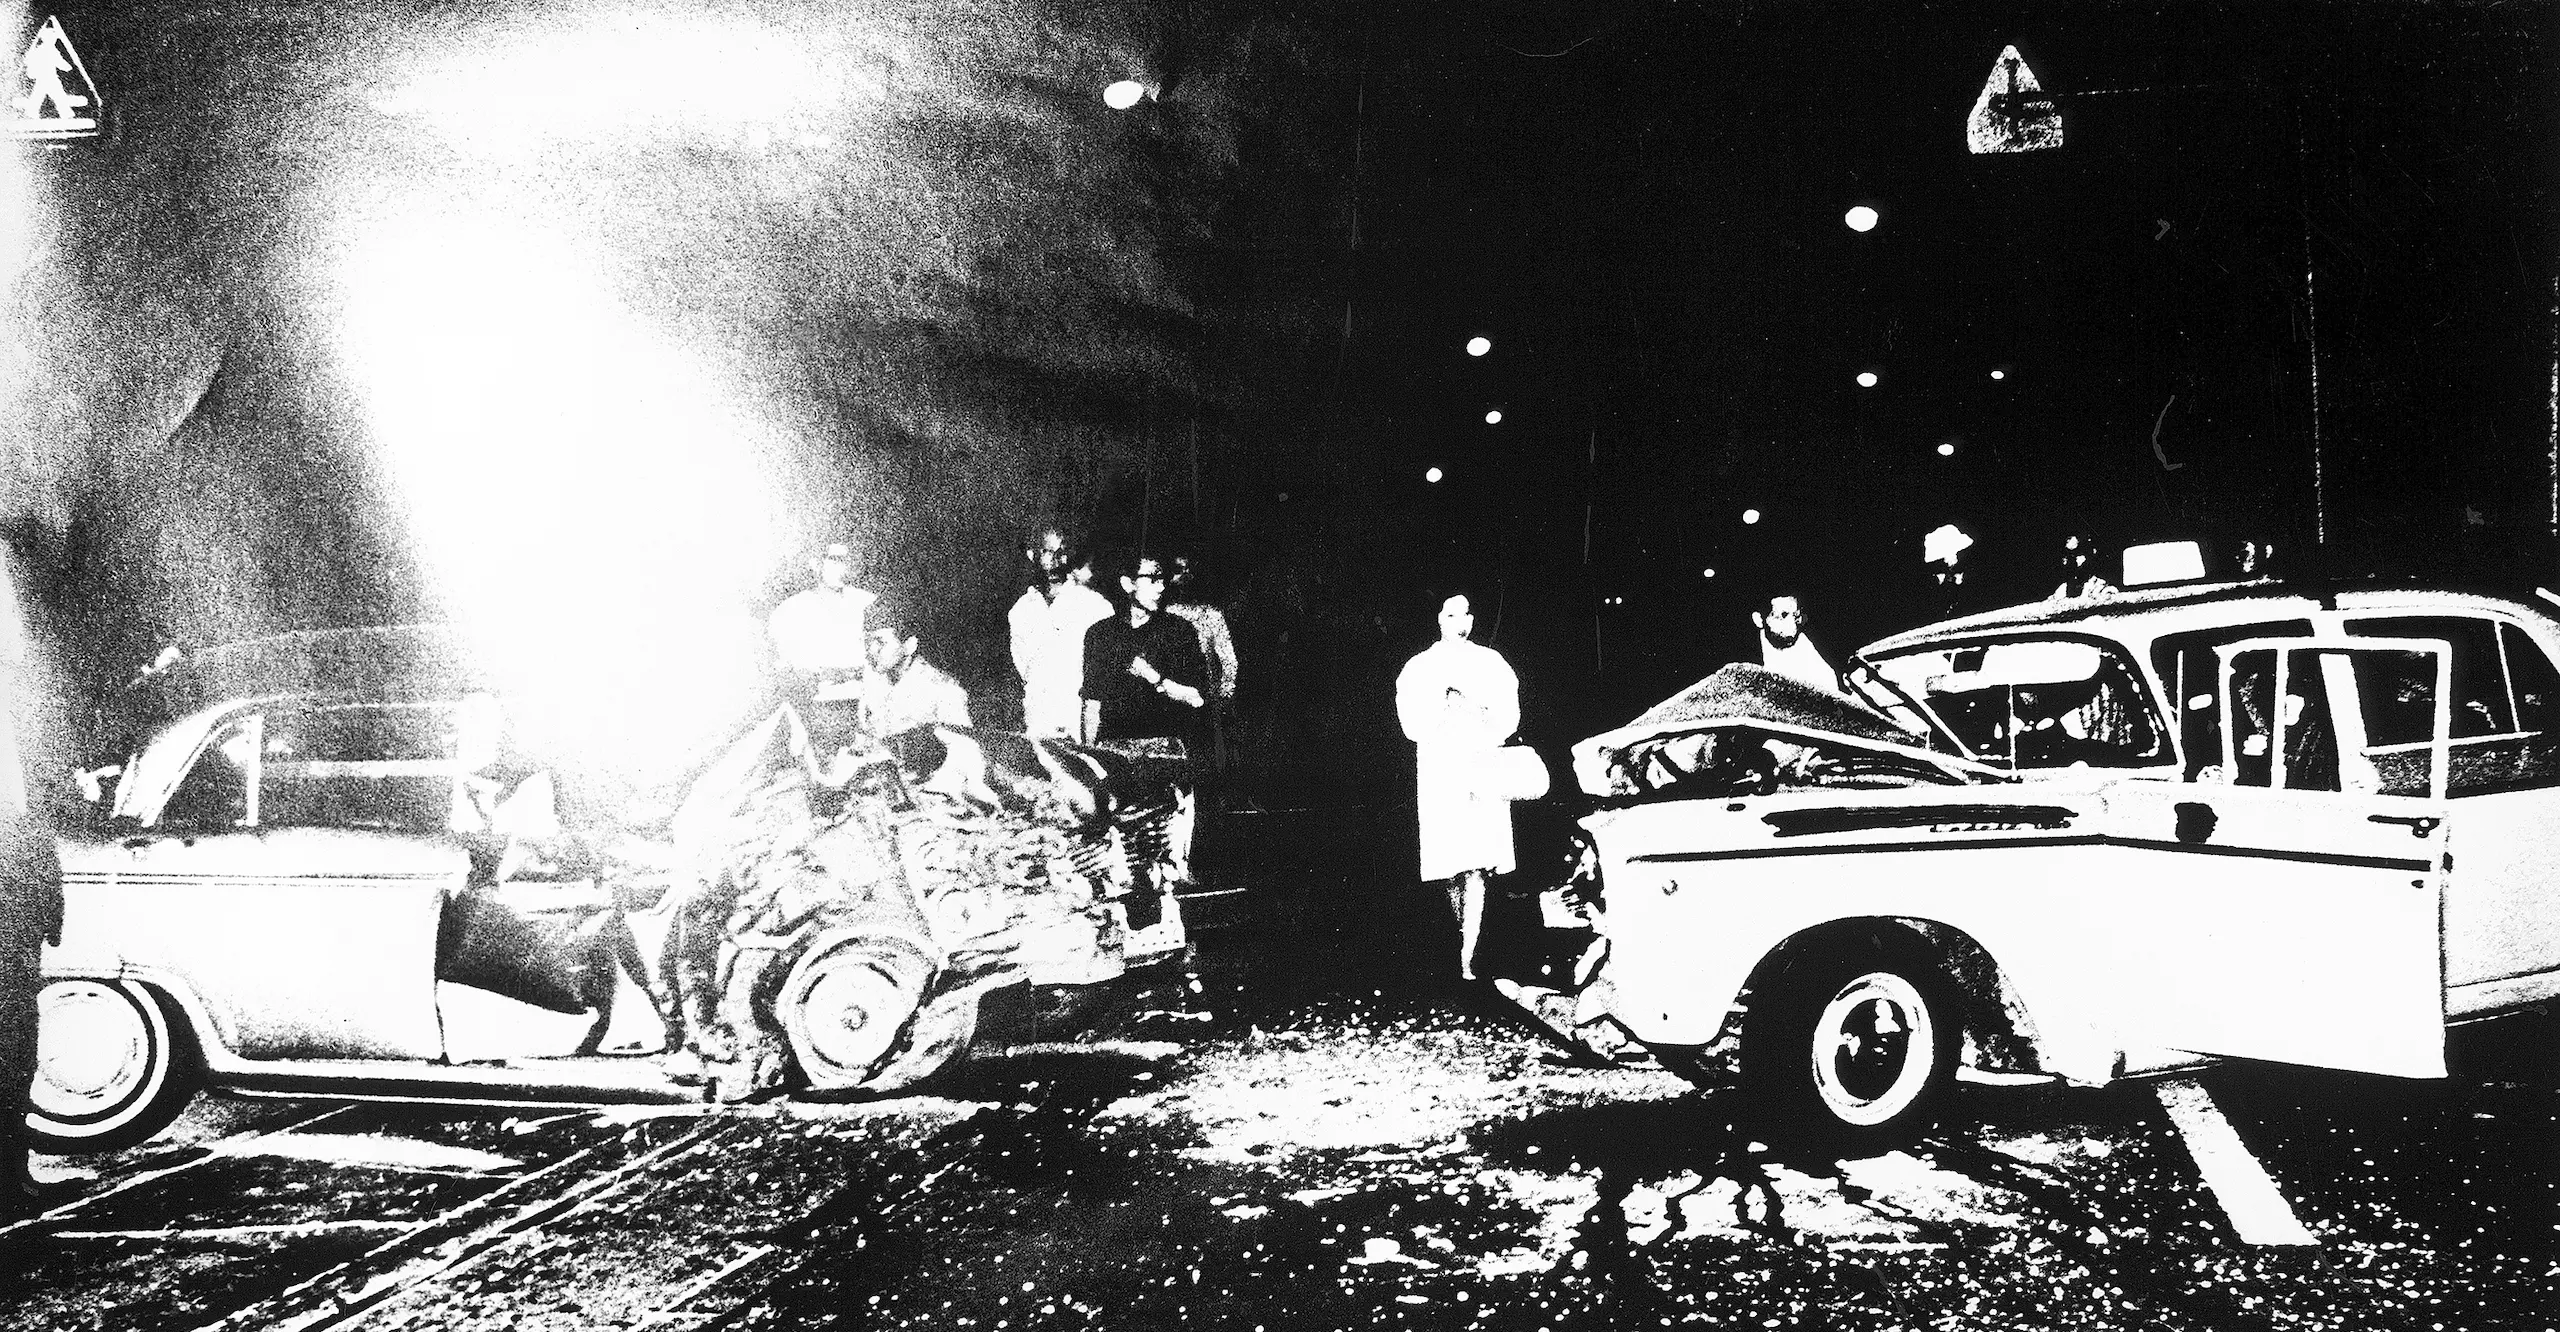 High contrast black and white photograph of two severely damaged cars and a small crowd